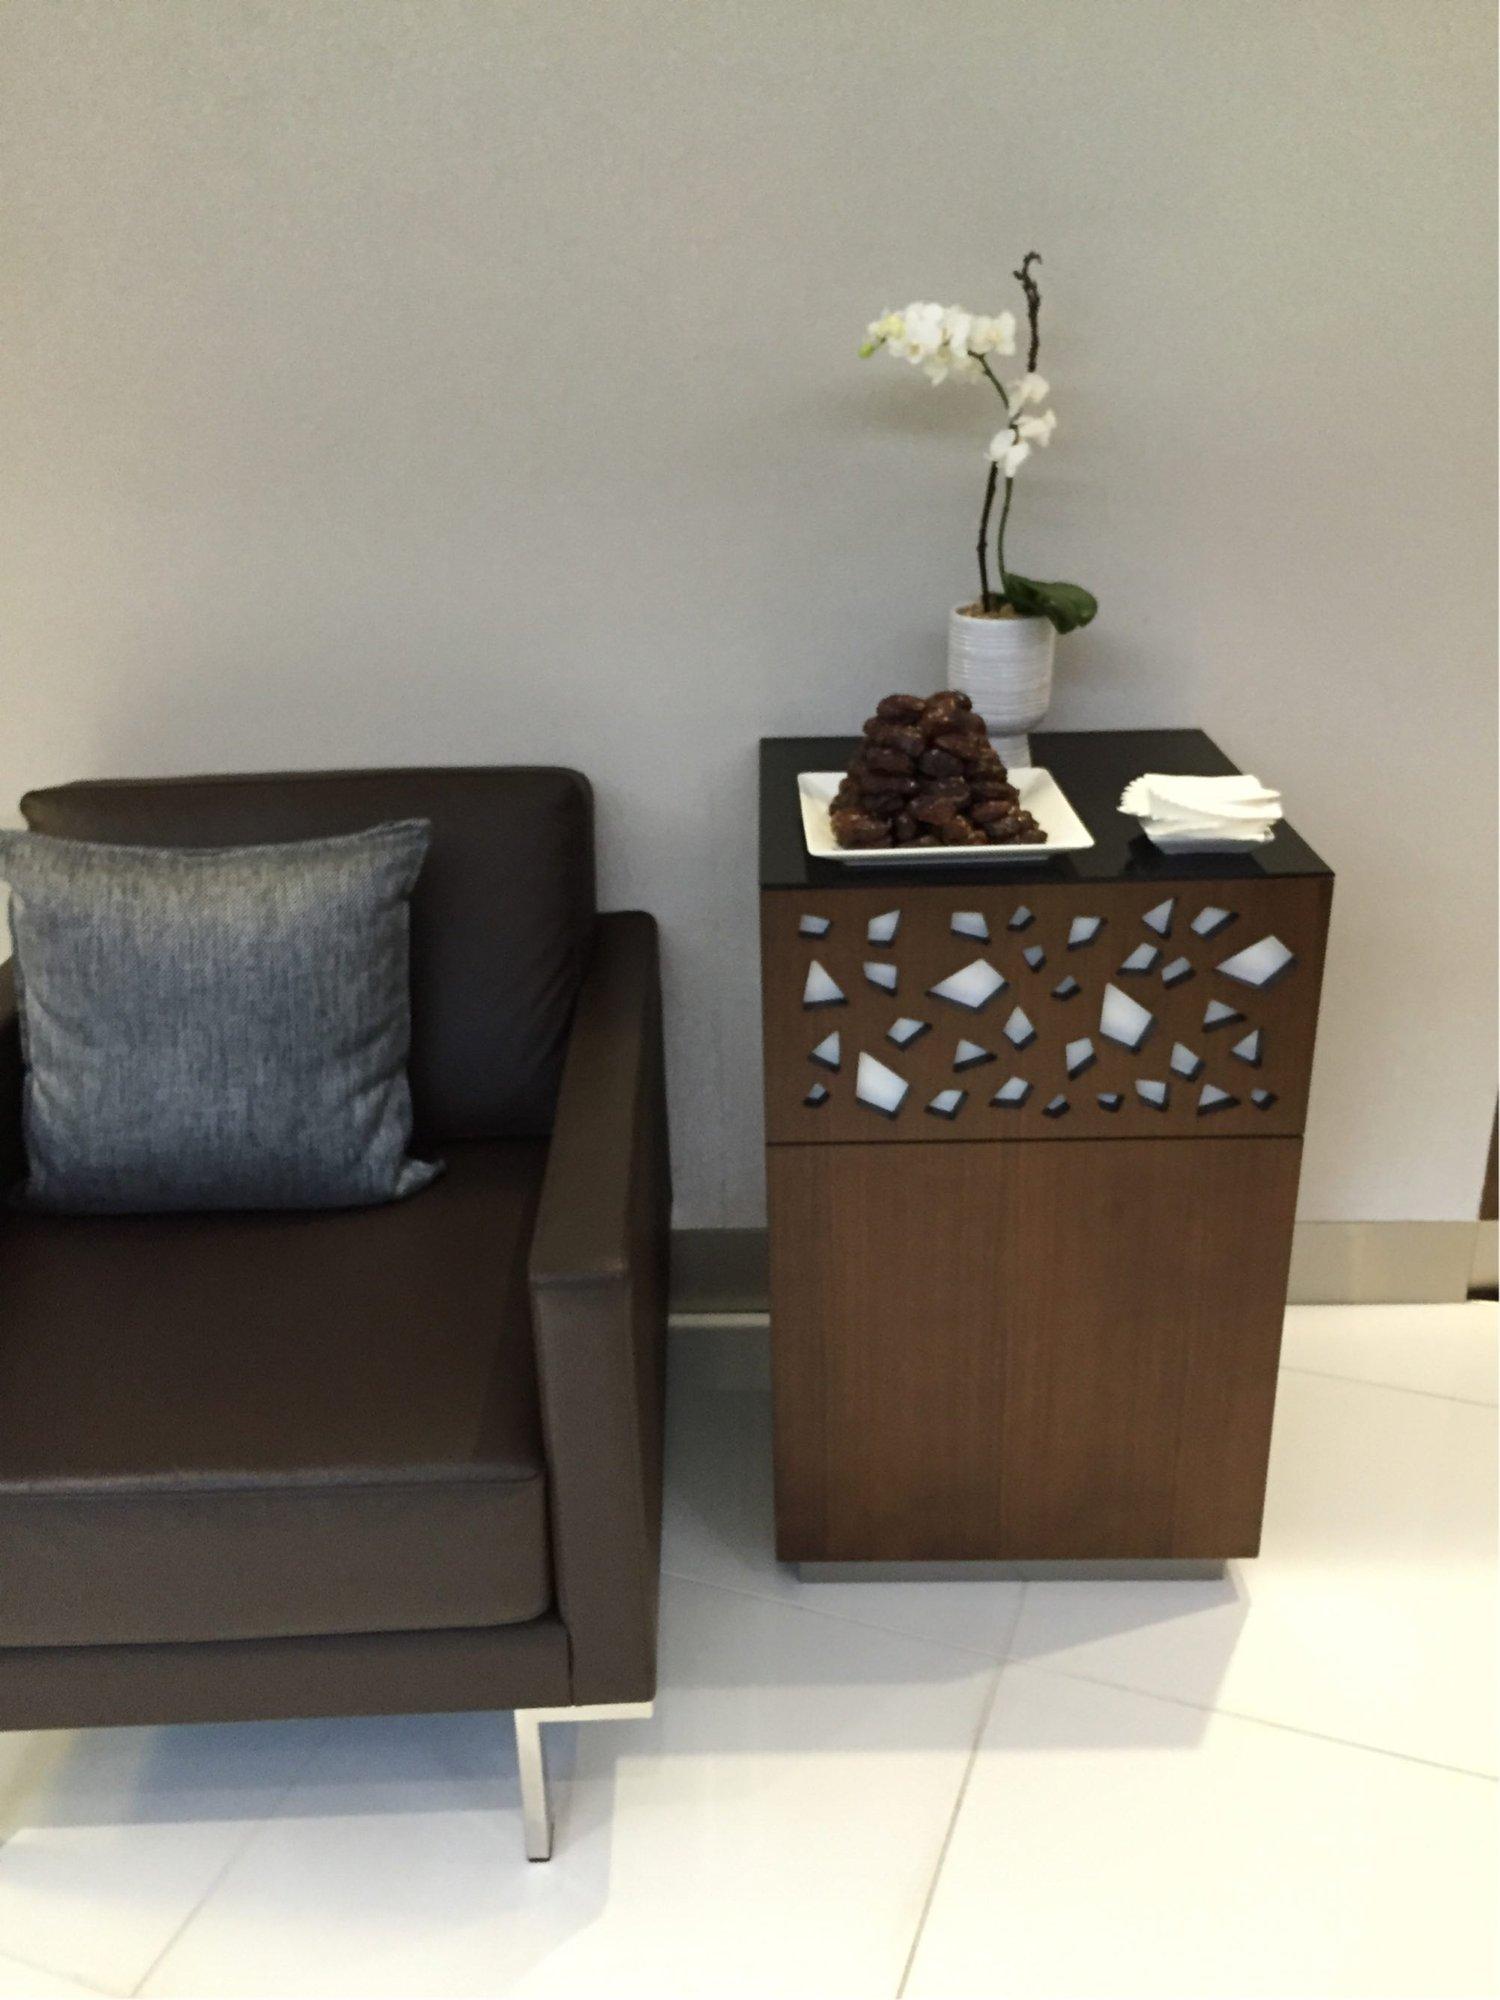 Etihad Airways First & Business Class Lounge image 8 of 17